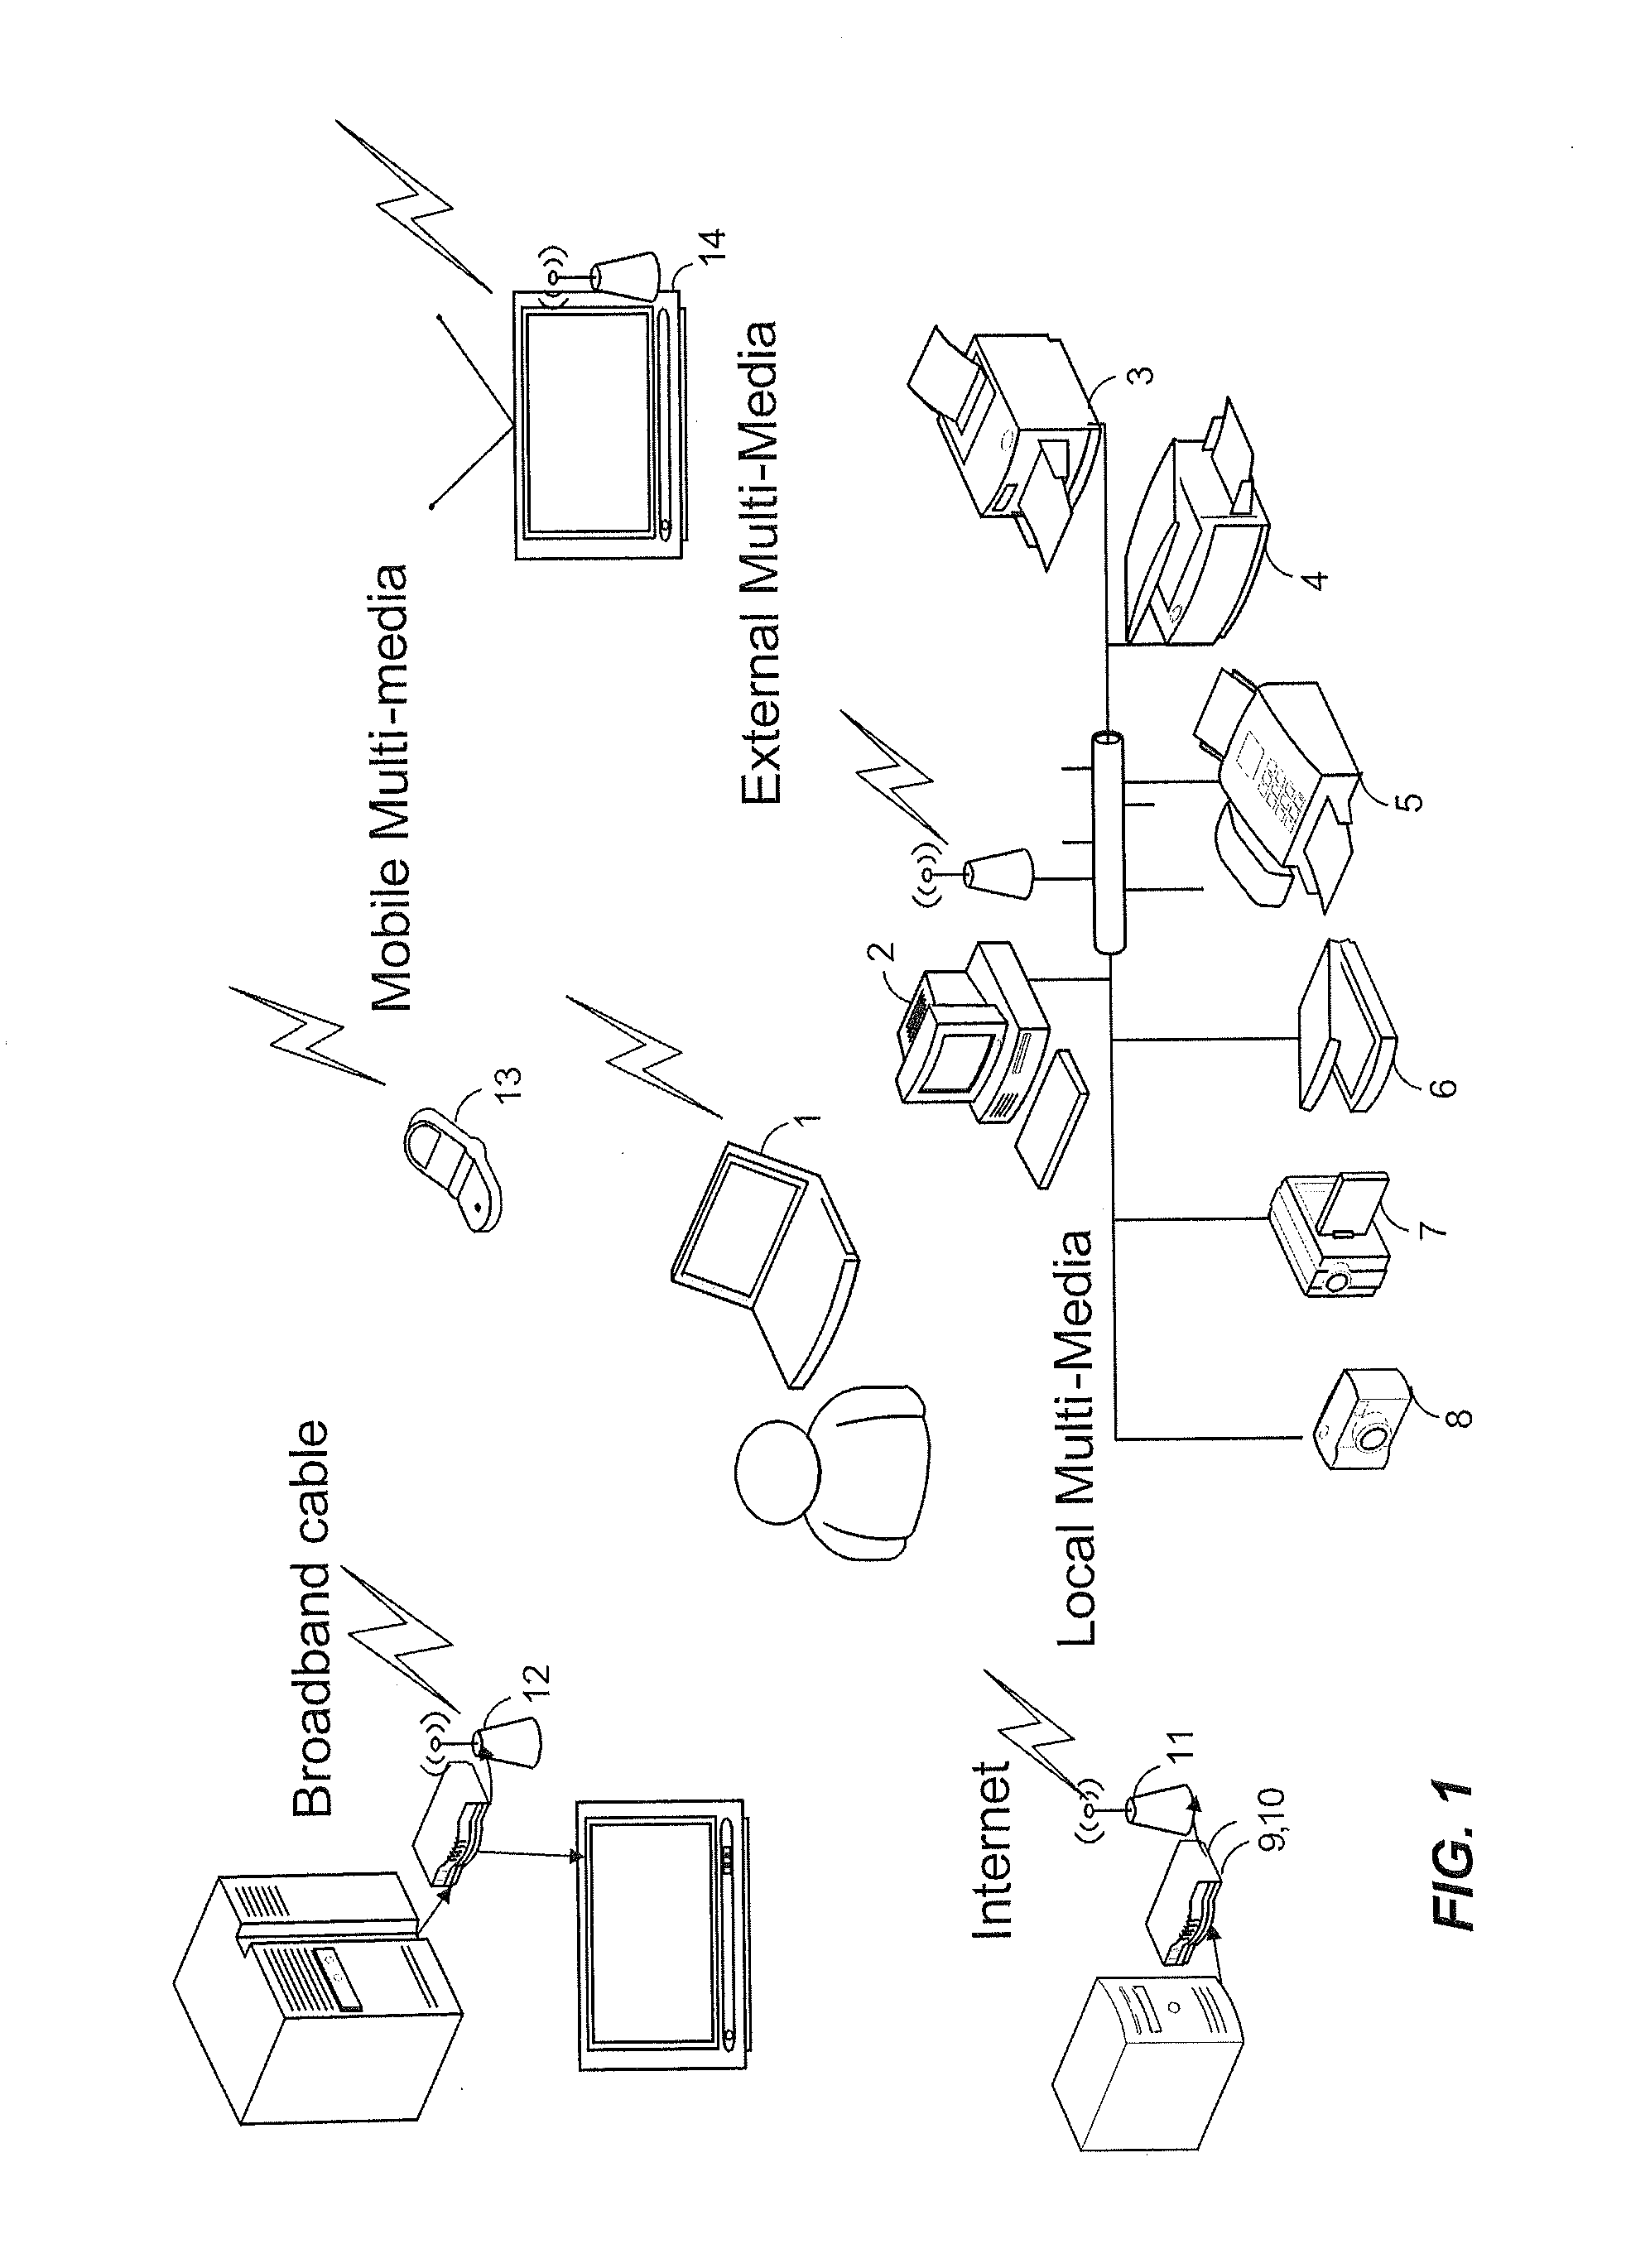 Streaming traffic classification method and apparatus